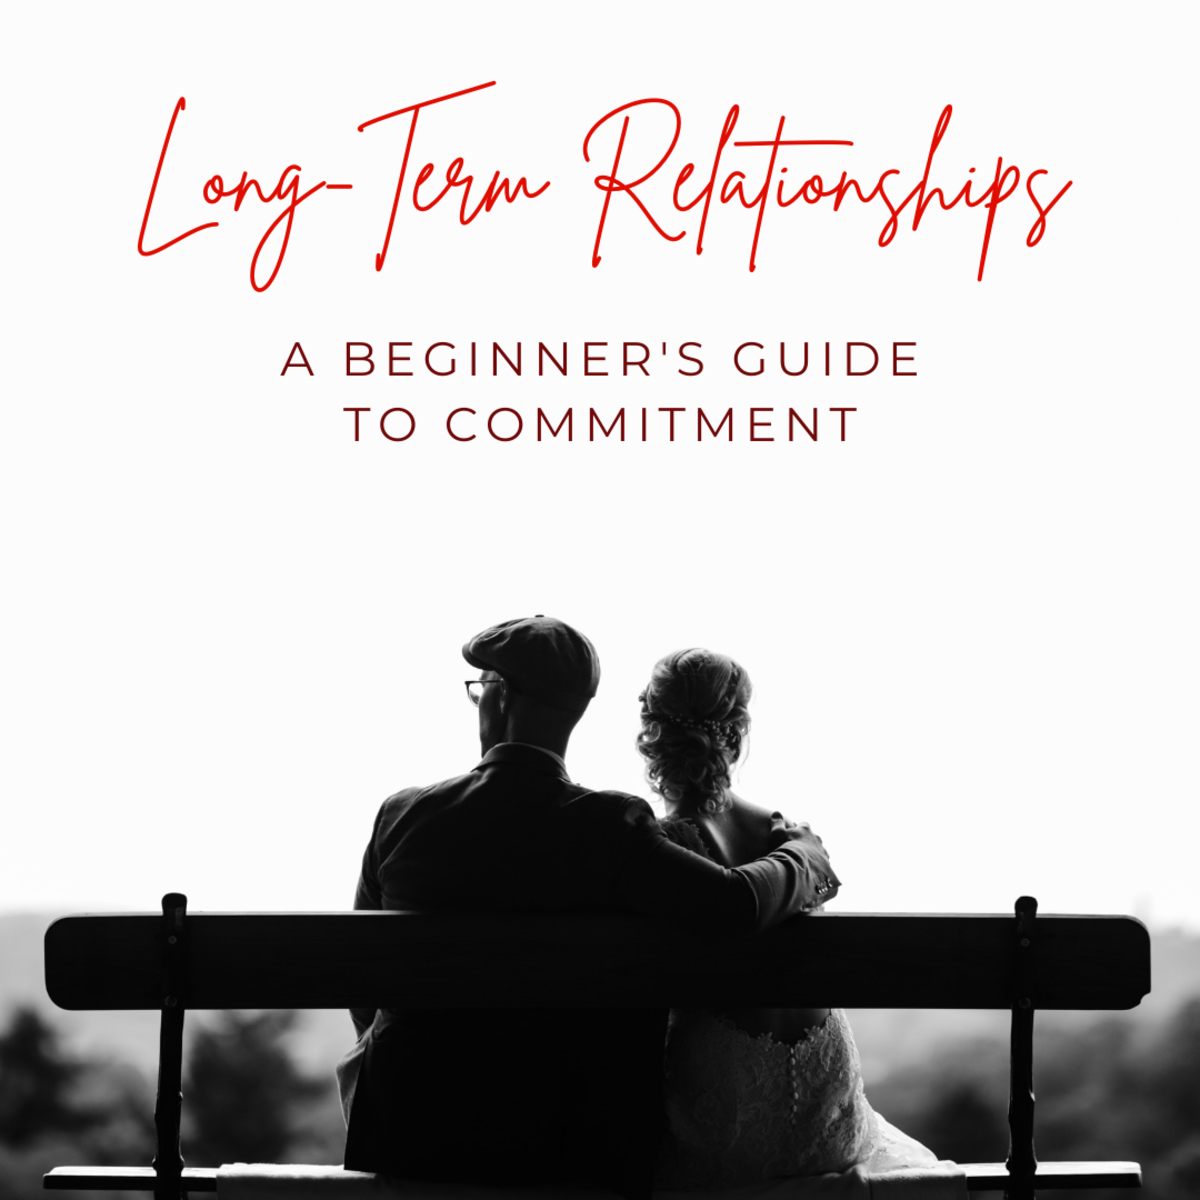 Long-Term Relationships: A Beginner's Guide to Lasting Commitment